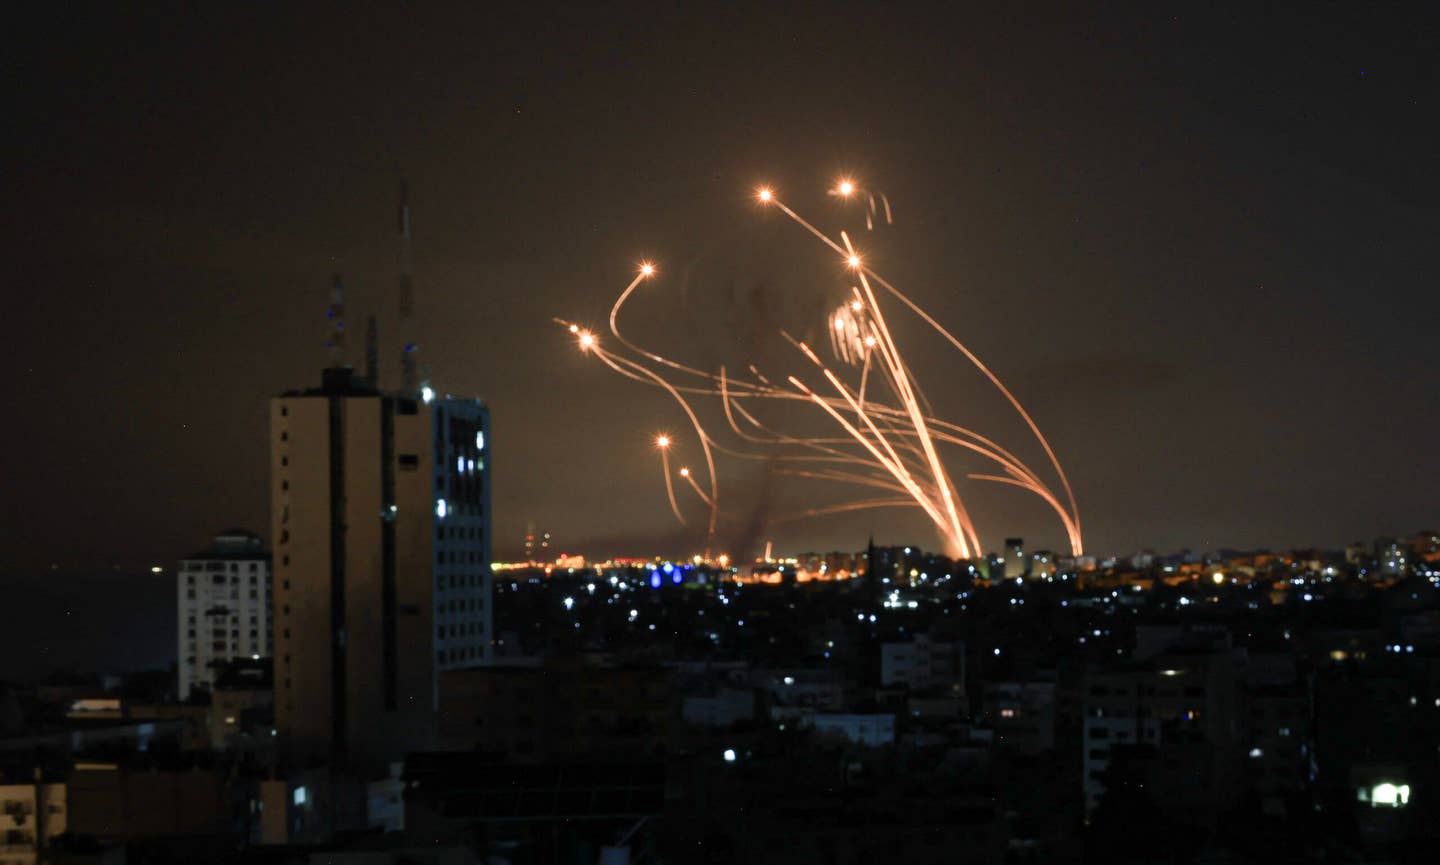 Missiles launched from the Iron Dome missile system intercept rockets fired from the Gaza Strip, over the city of Netivot in southern Israel, on October 8, 2023. <em>Photo by MAHMUD HAMS/AFP via Getty Images</em>